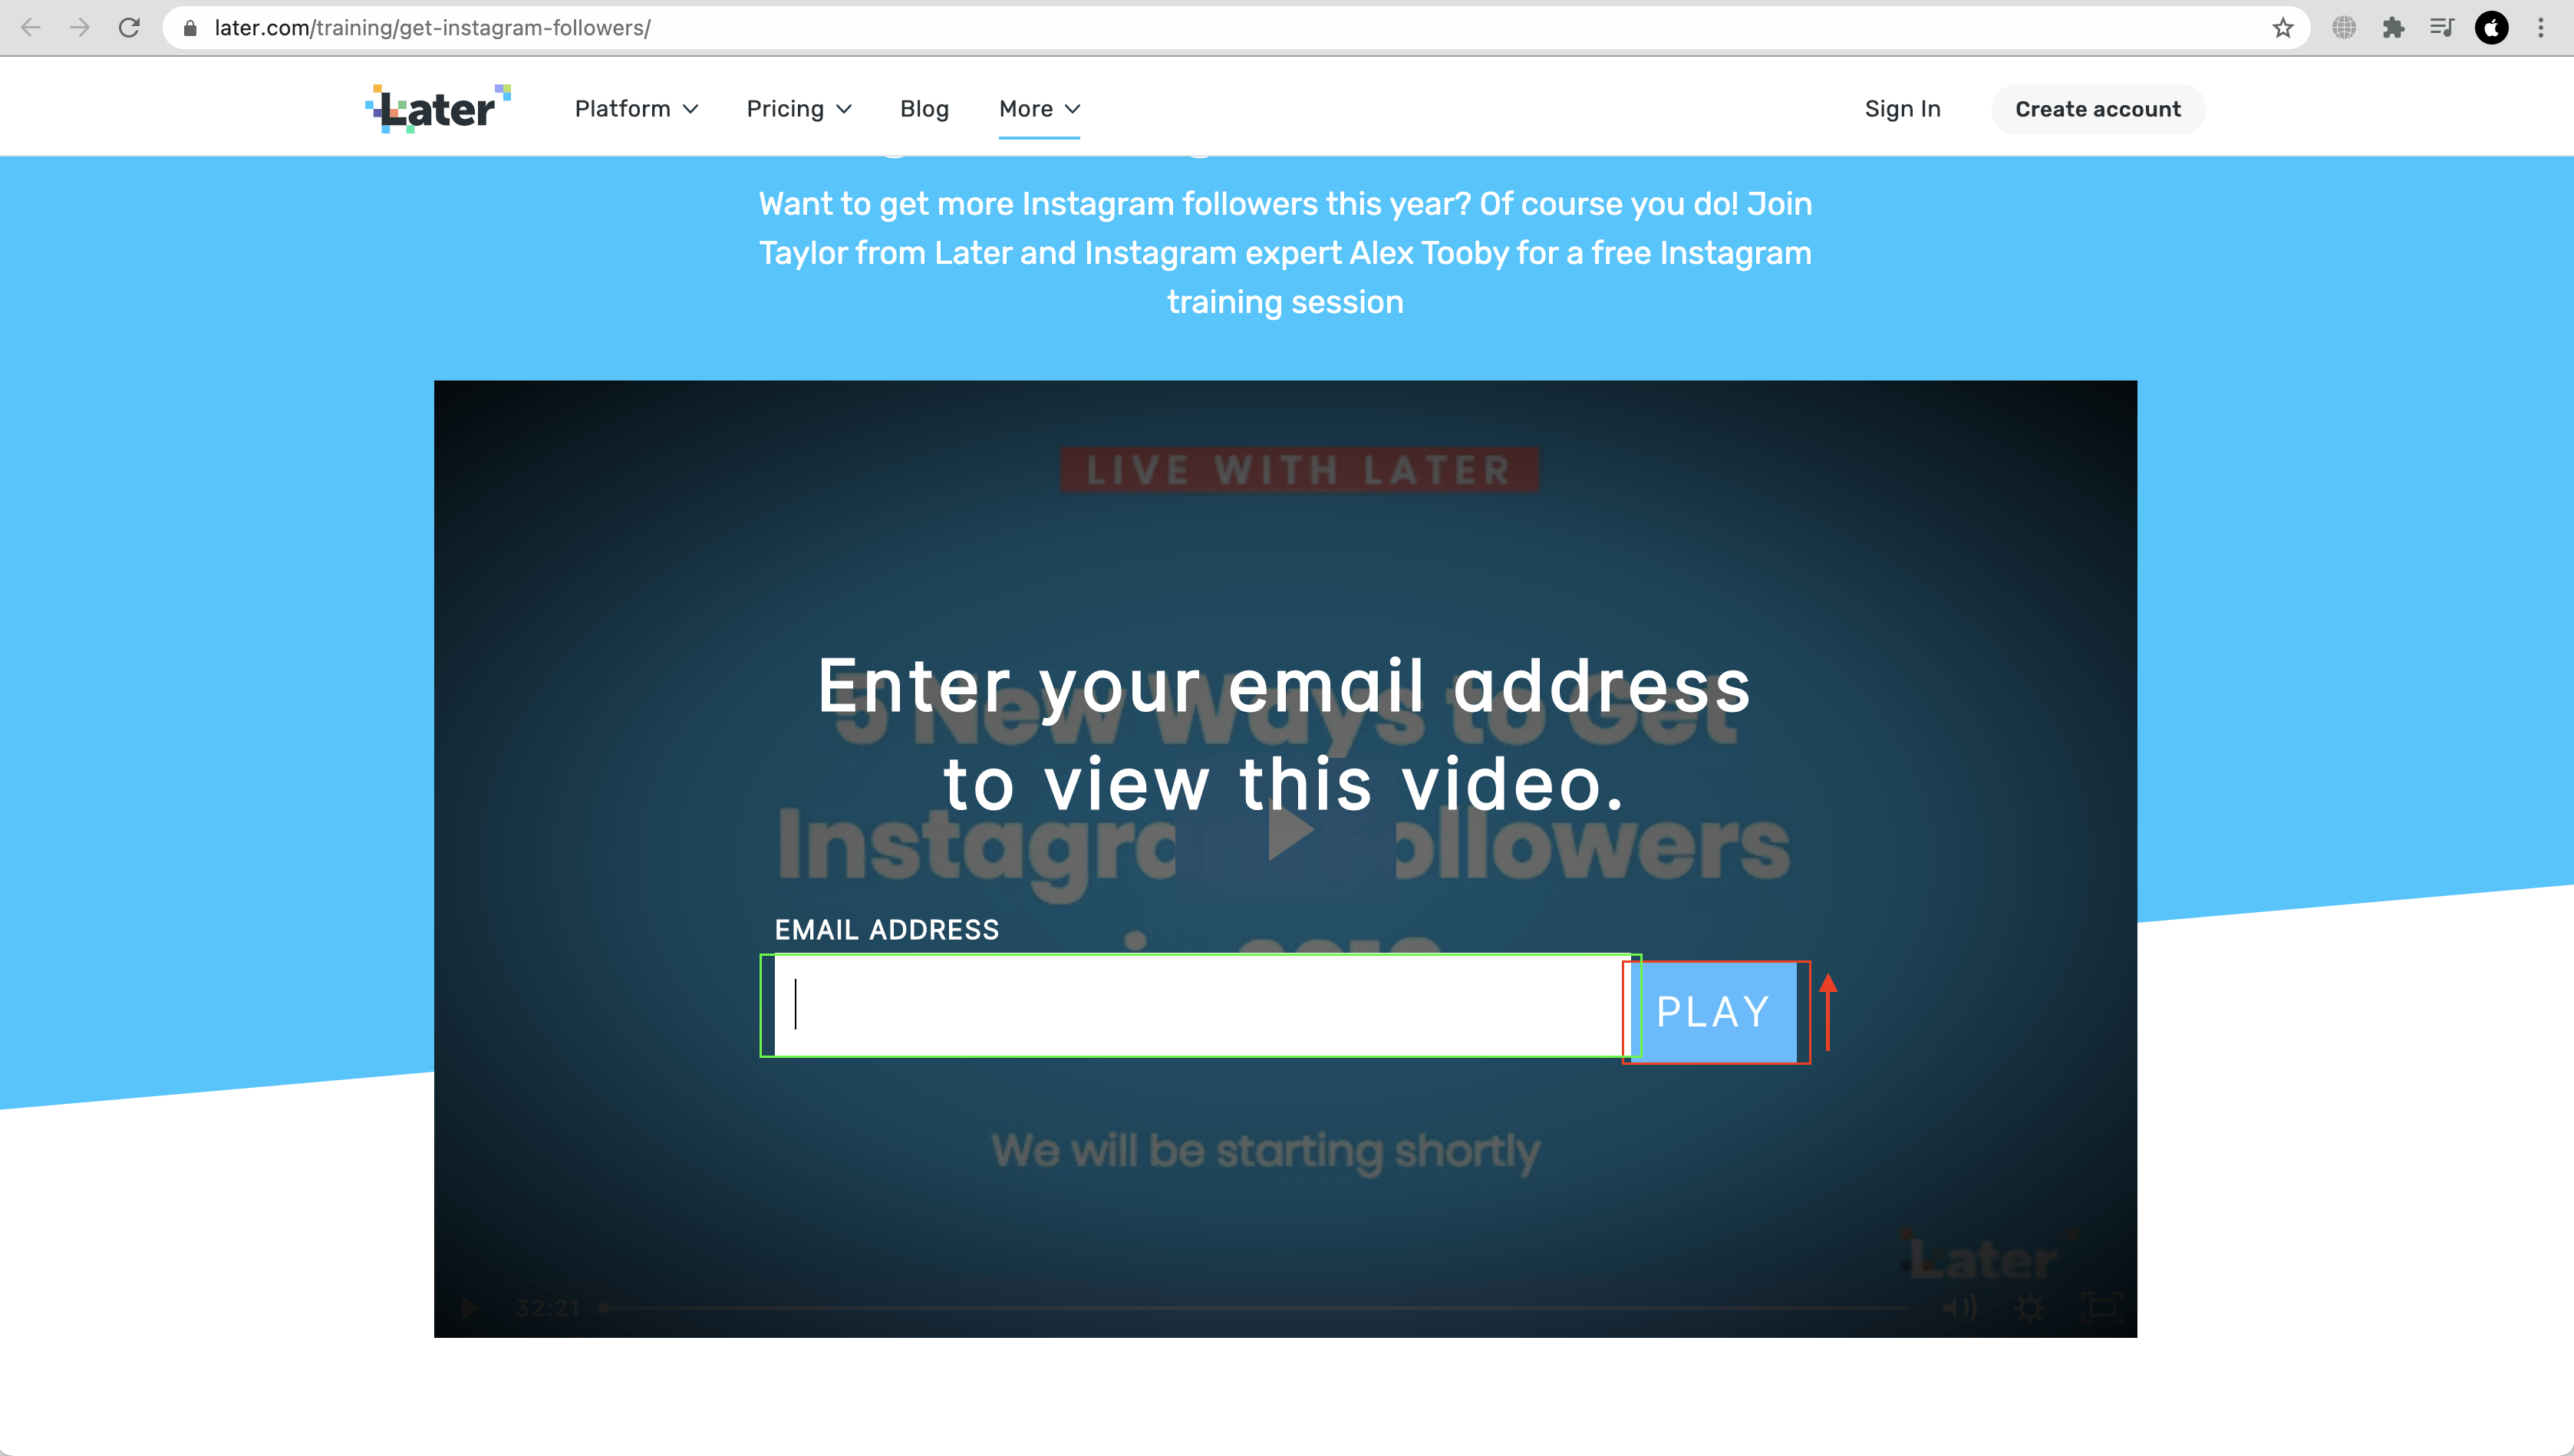 “Play” button is positioned lower than the email input